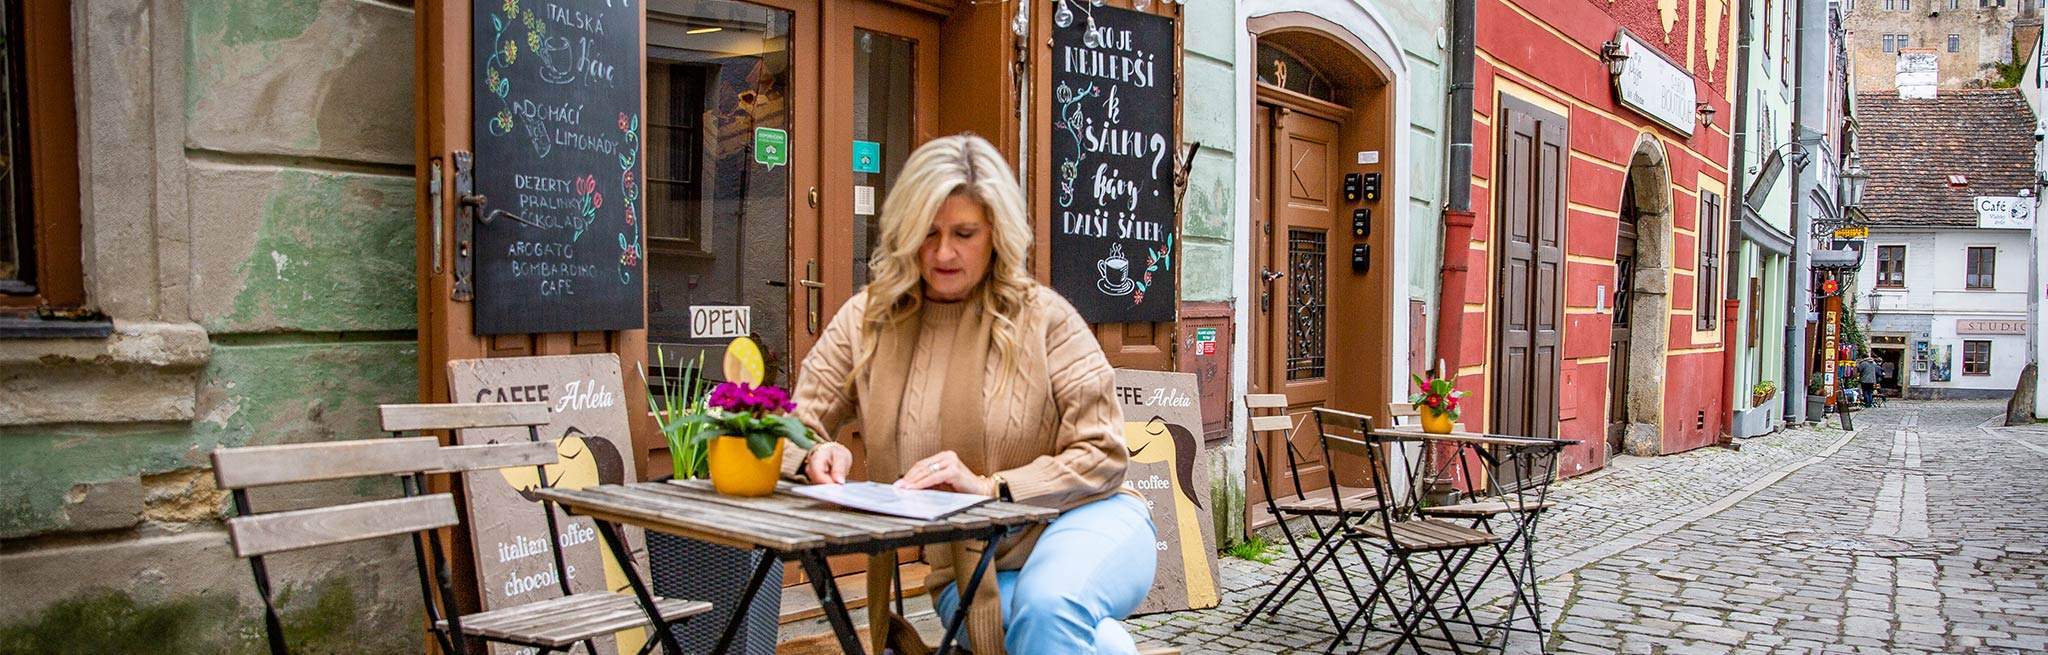 A woman working outside a cafe